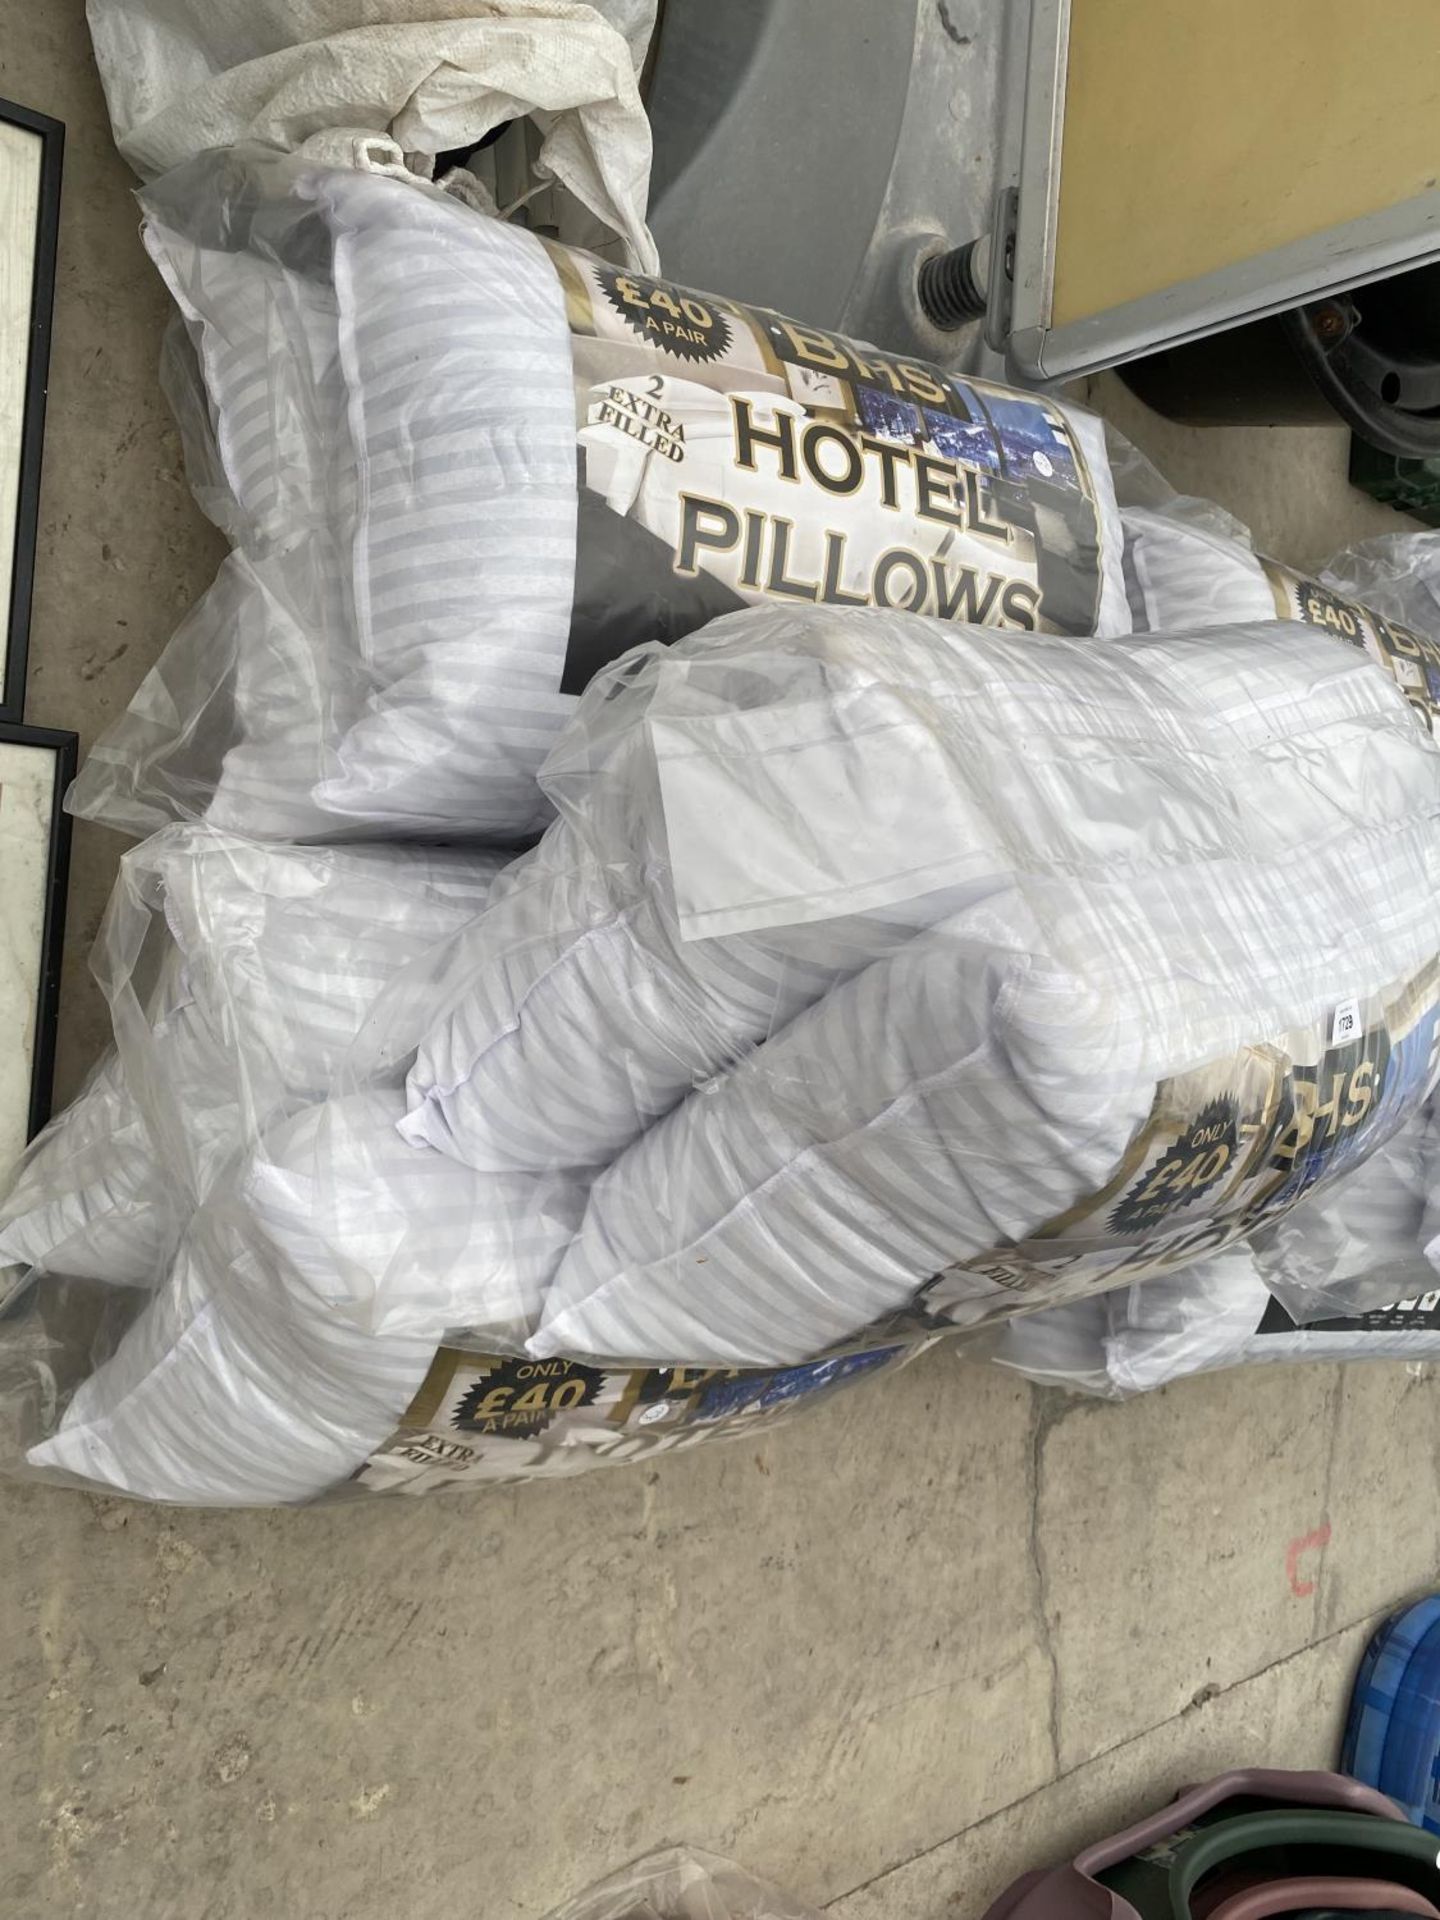 SIX AS NEW BHS HOTEL PILLOWS